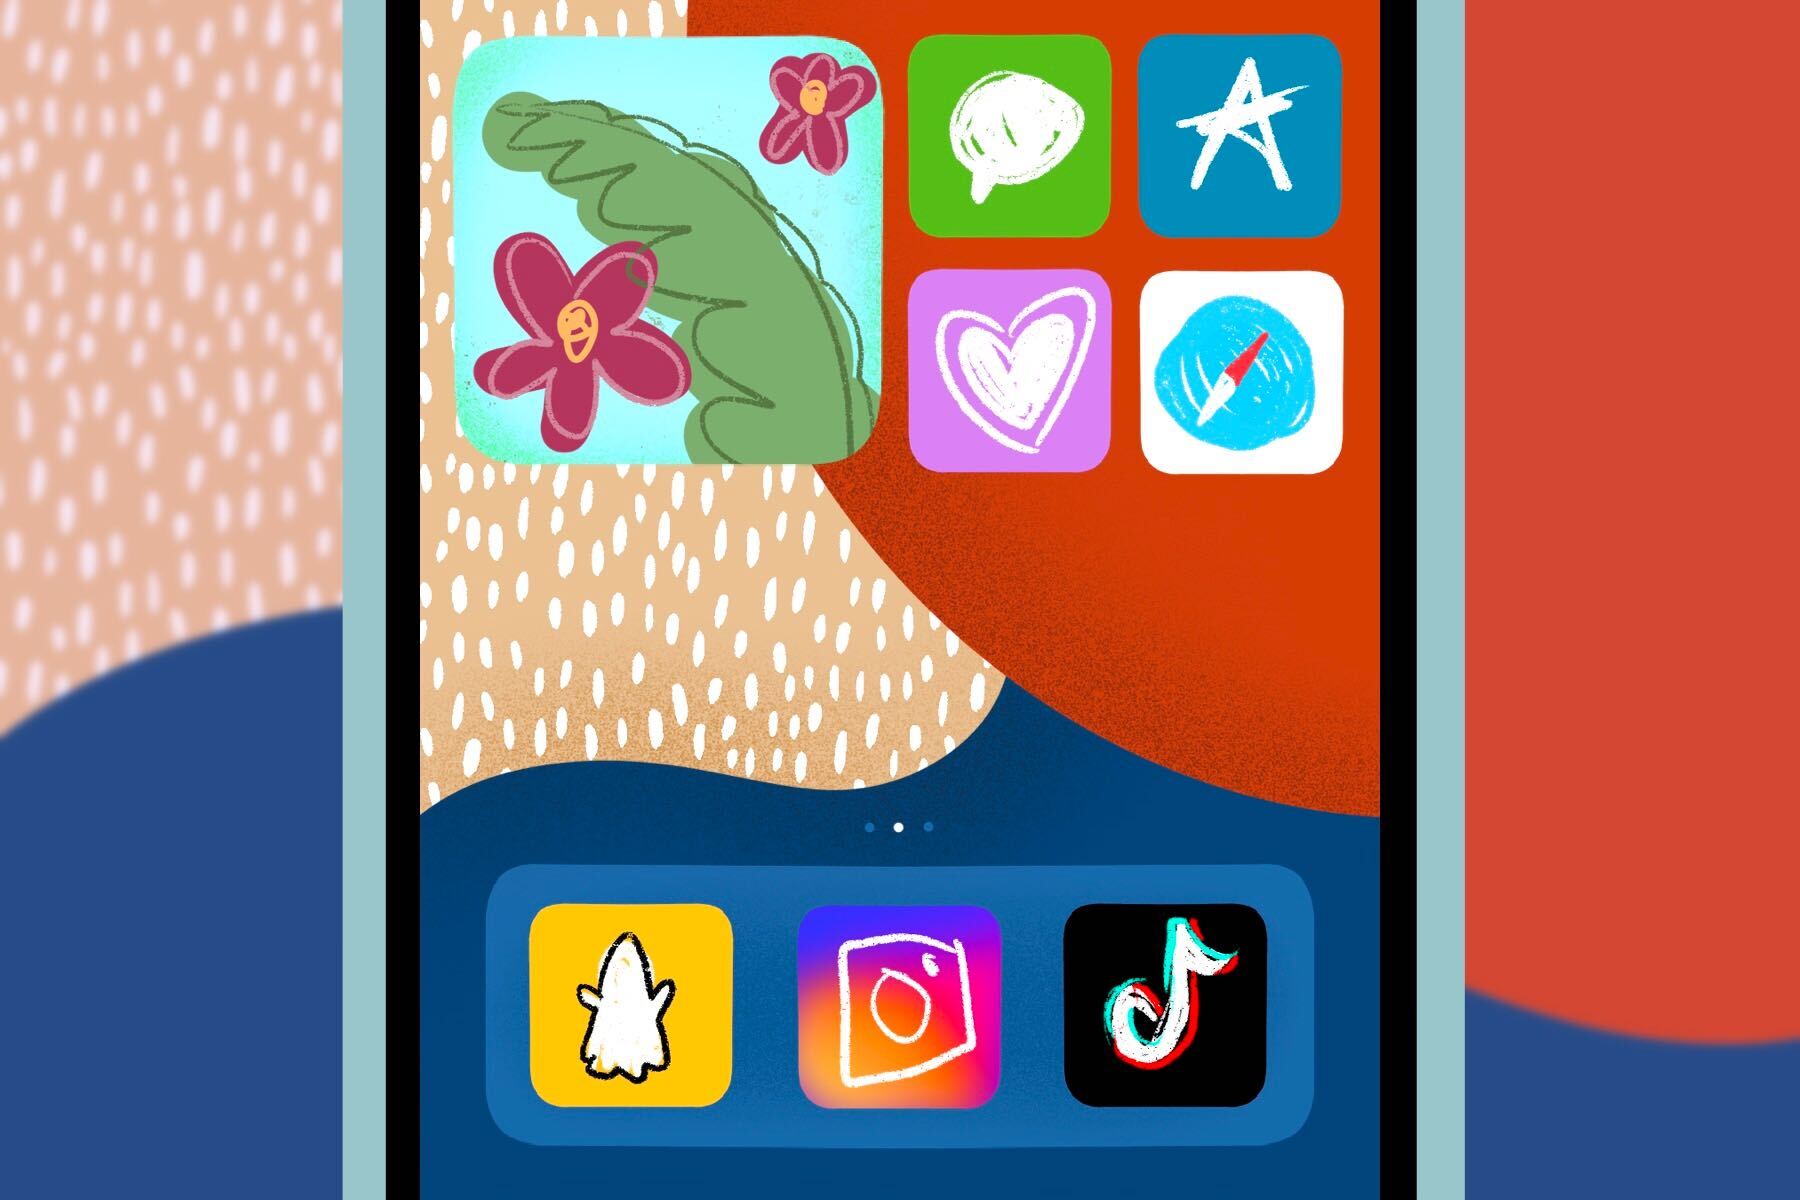 For an article about iOS 14, an illustration by Daisy Daniel's of an iPhone home screen